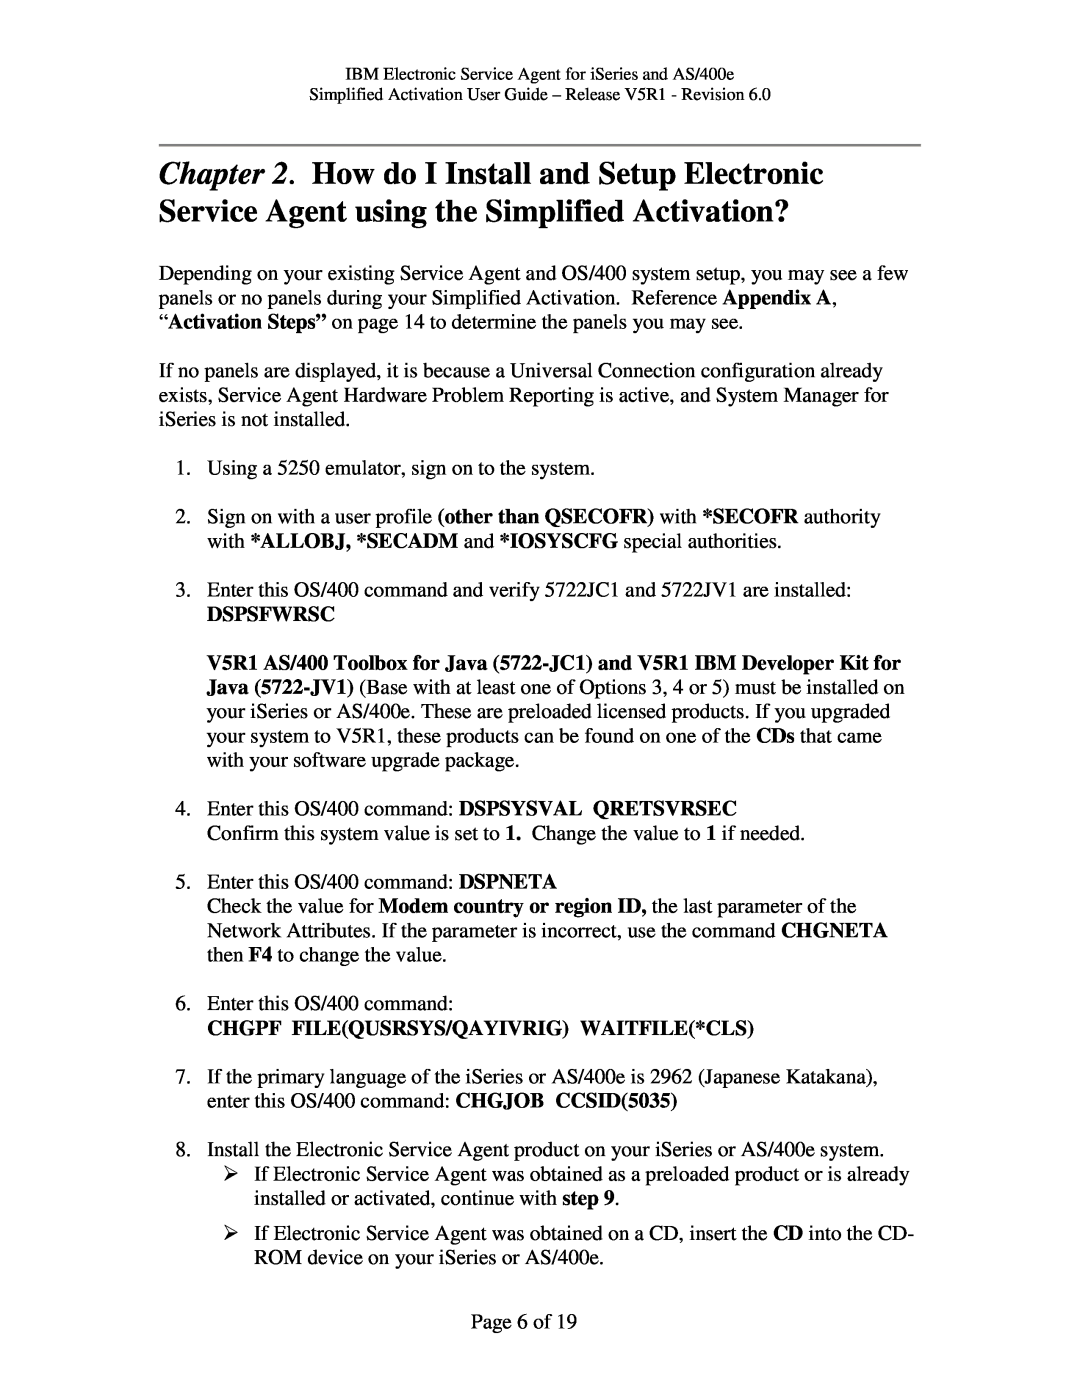 IBM iSeries, V5R1 manual How do I Install and Setup Electronic, Service Agent using the Simplified Activation?, Dspsfwrsc 